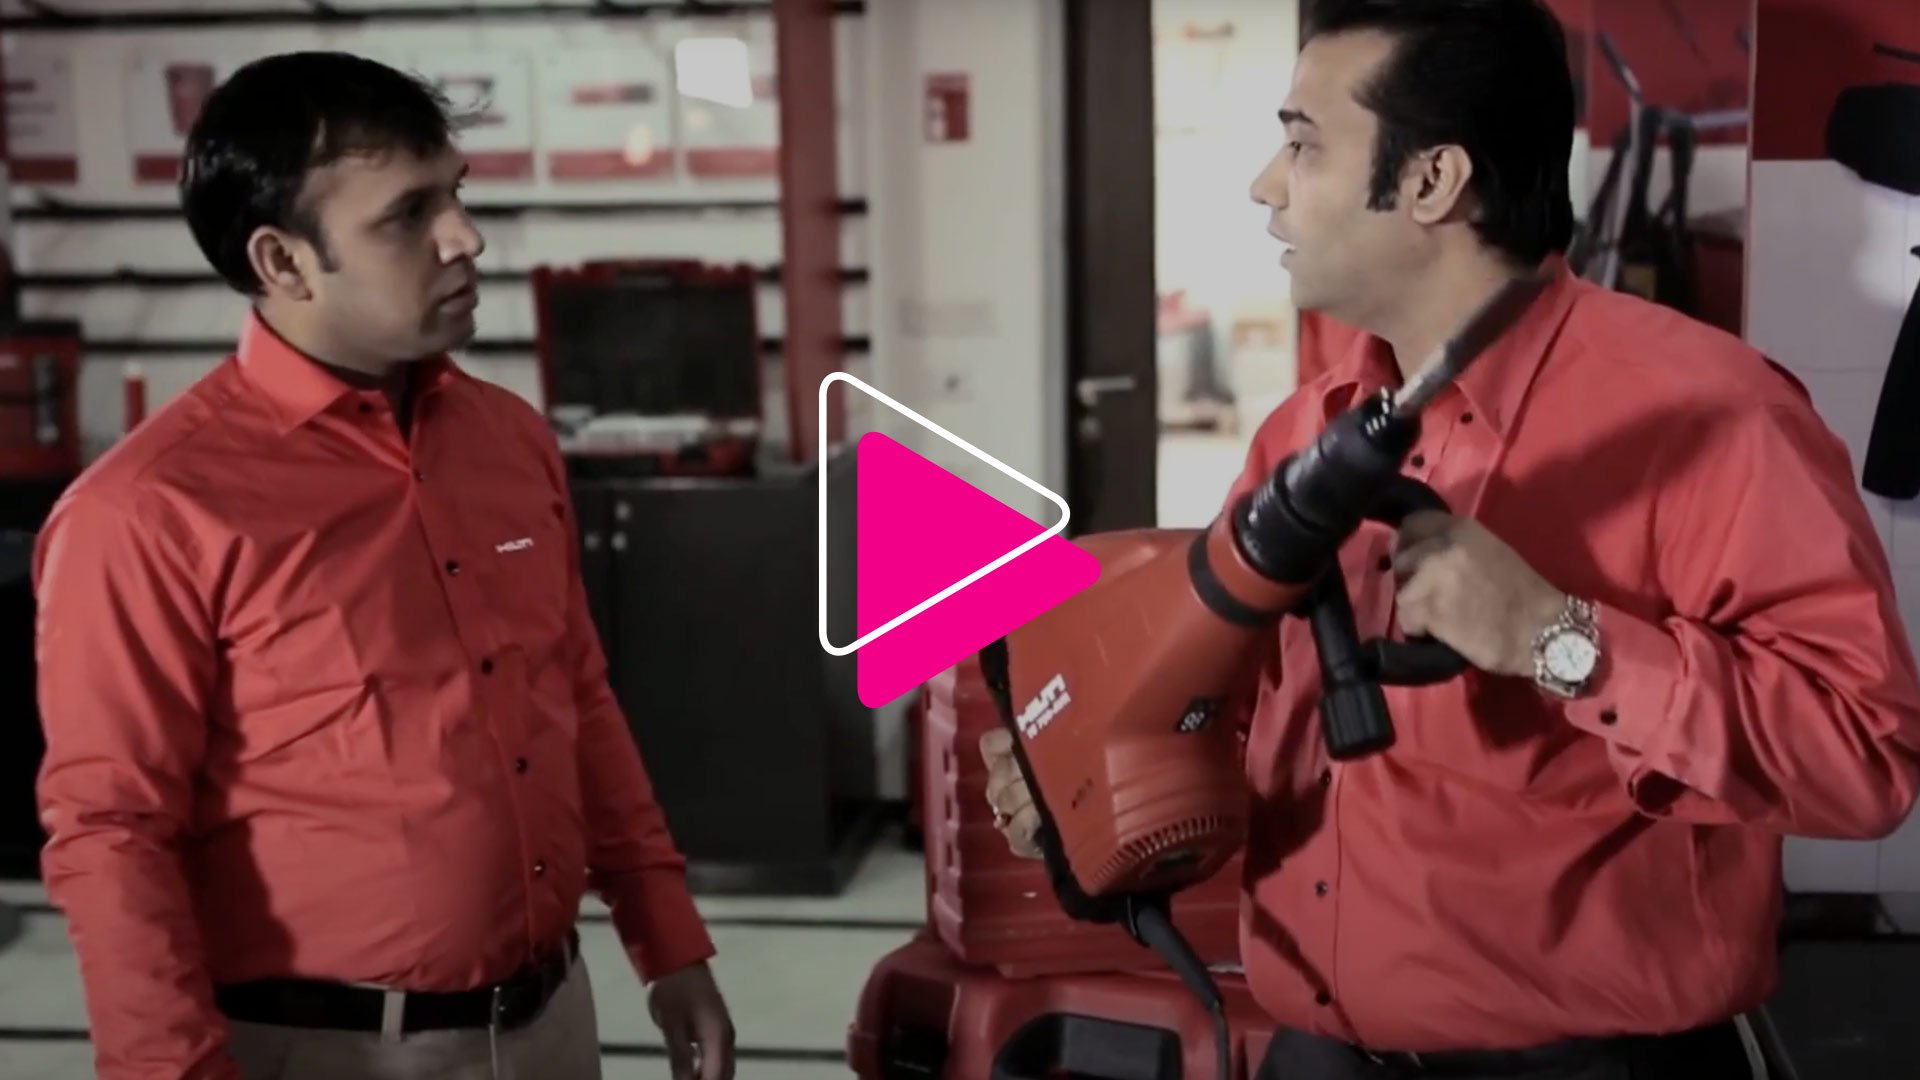 How Hilti Turned Off Their Lms To Increase Engagement & Performance